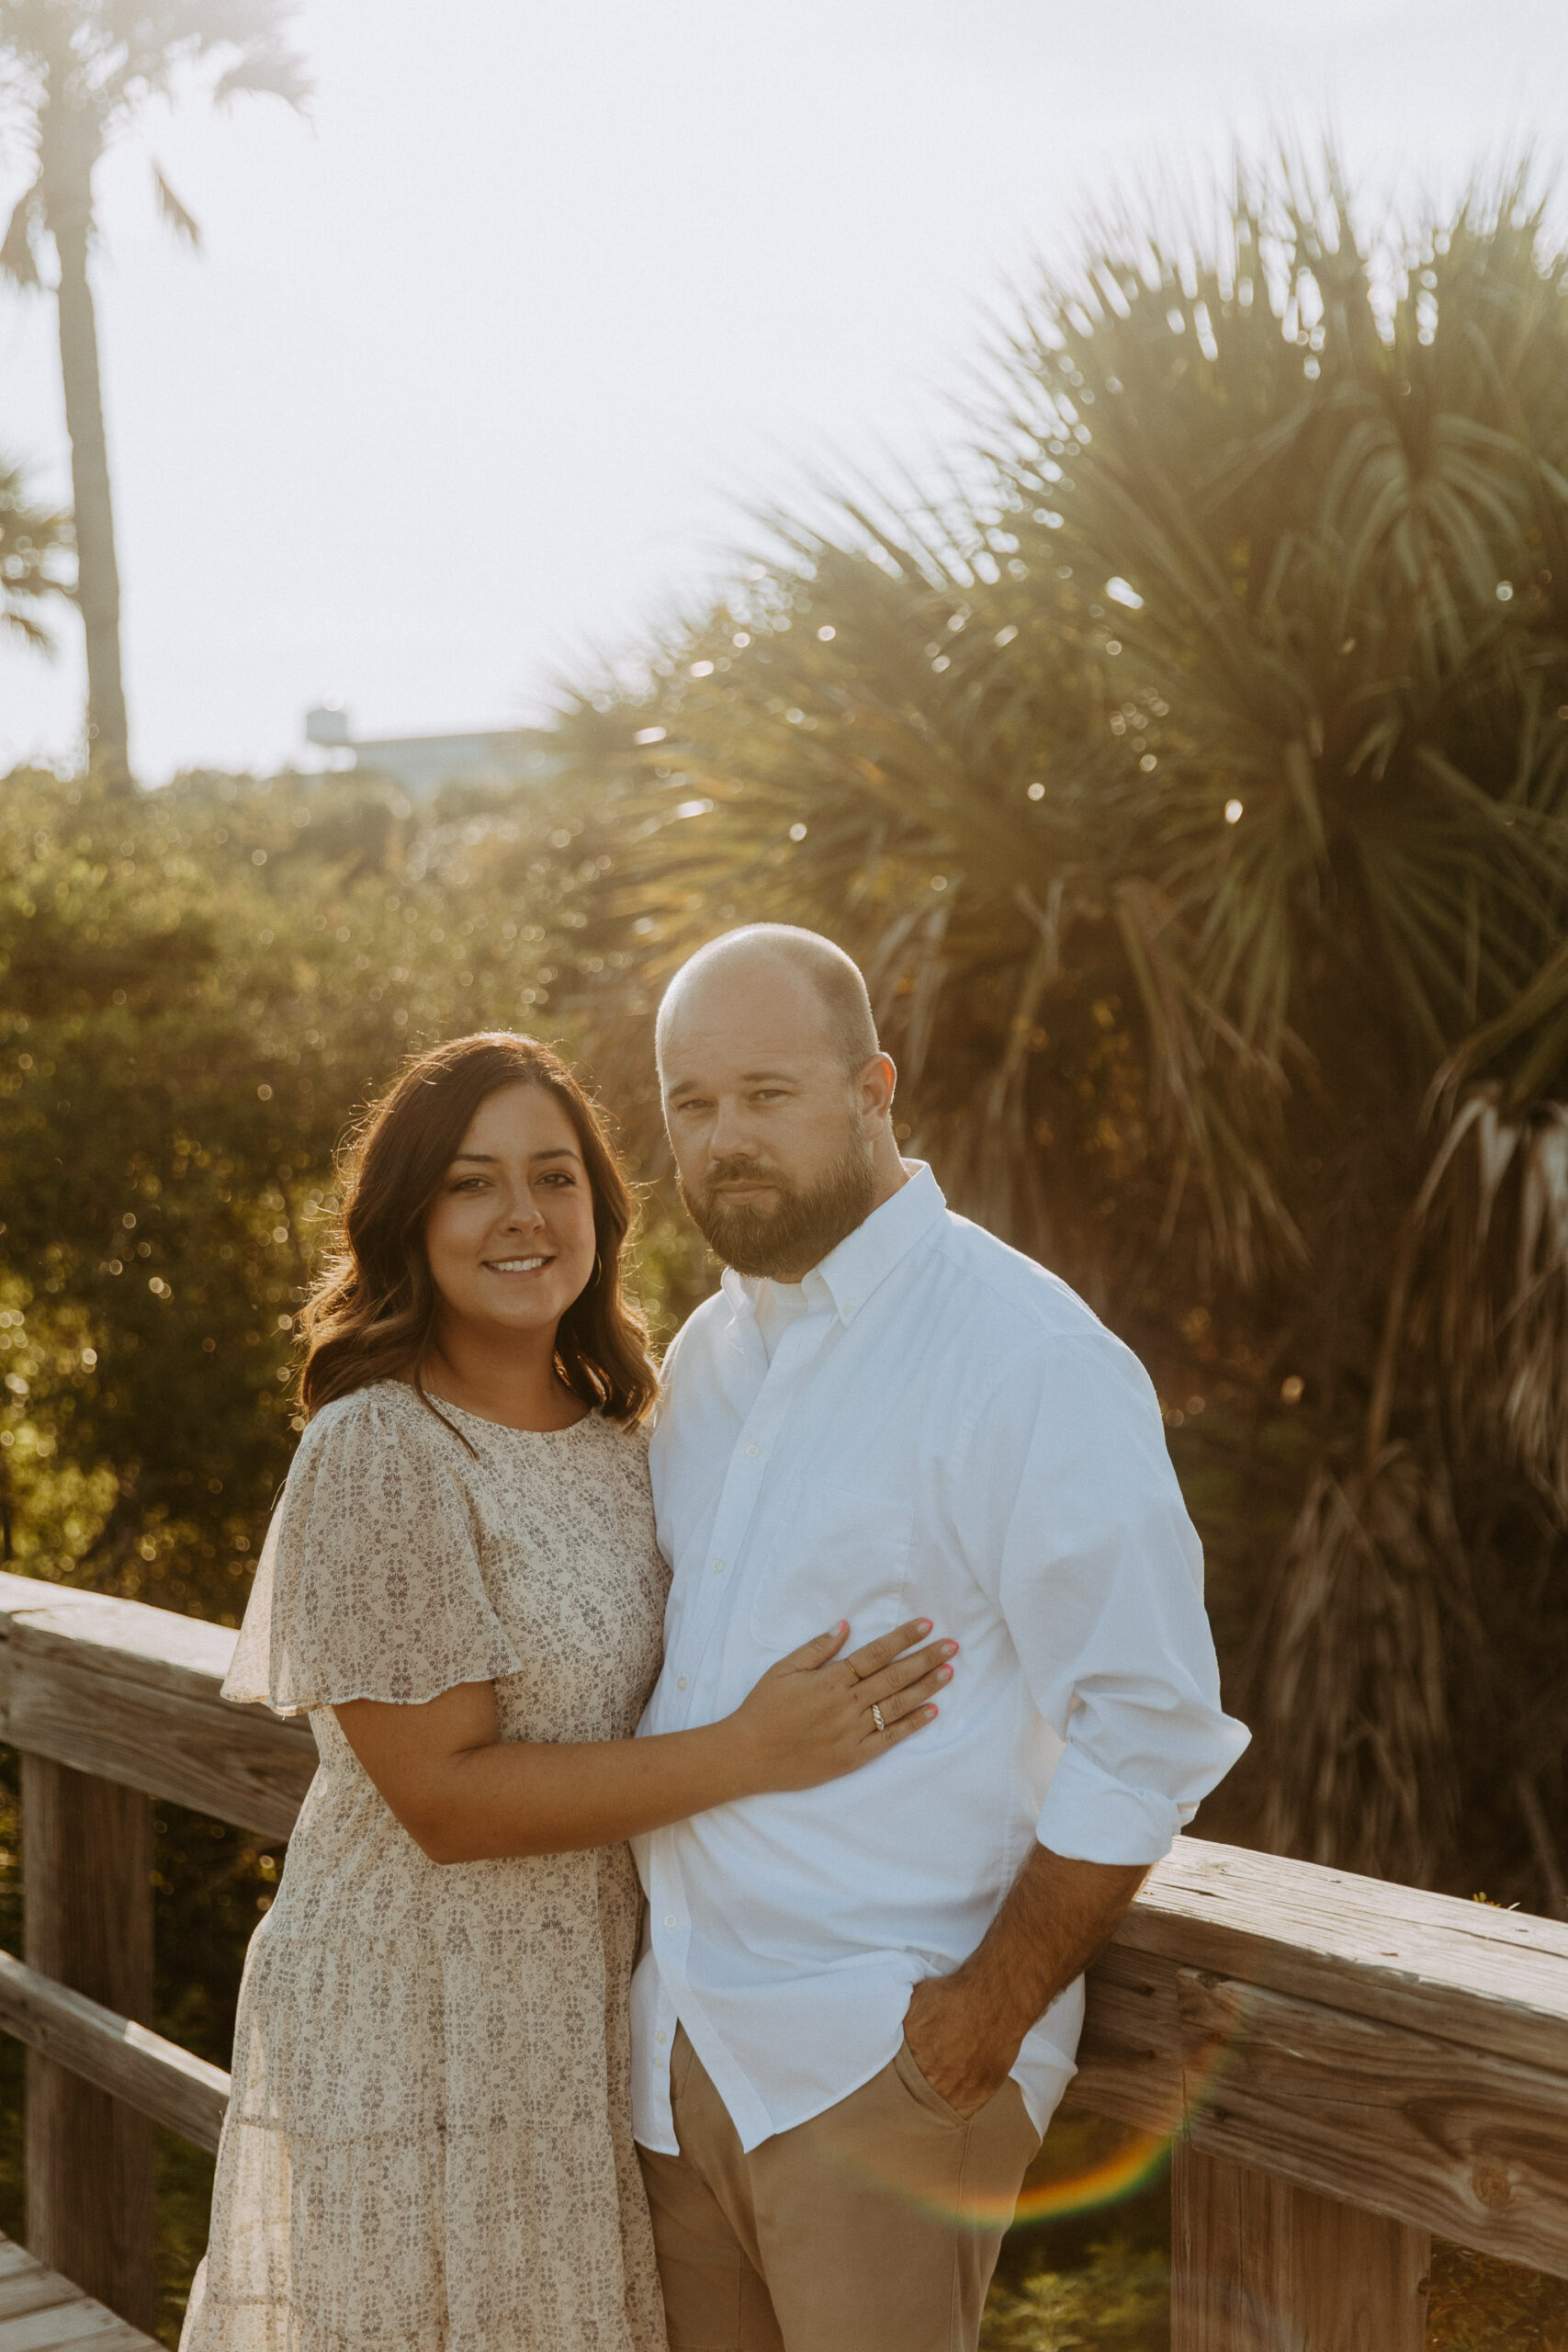 A couple posing together on a wooden walkway amidst tropical foliage at sunset at their anniversary session. 